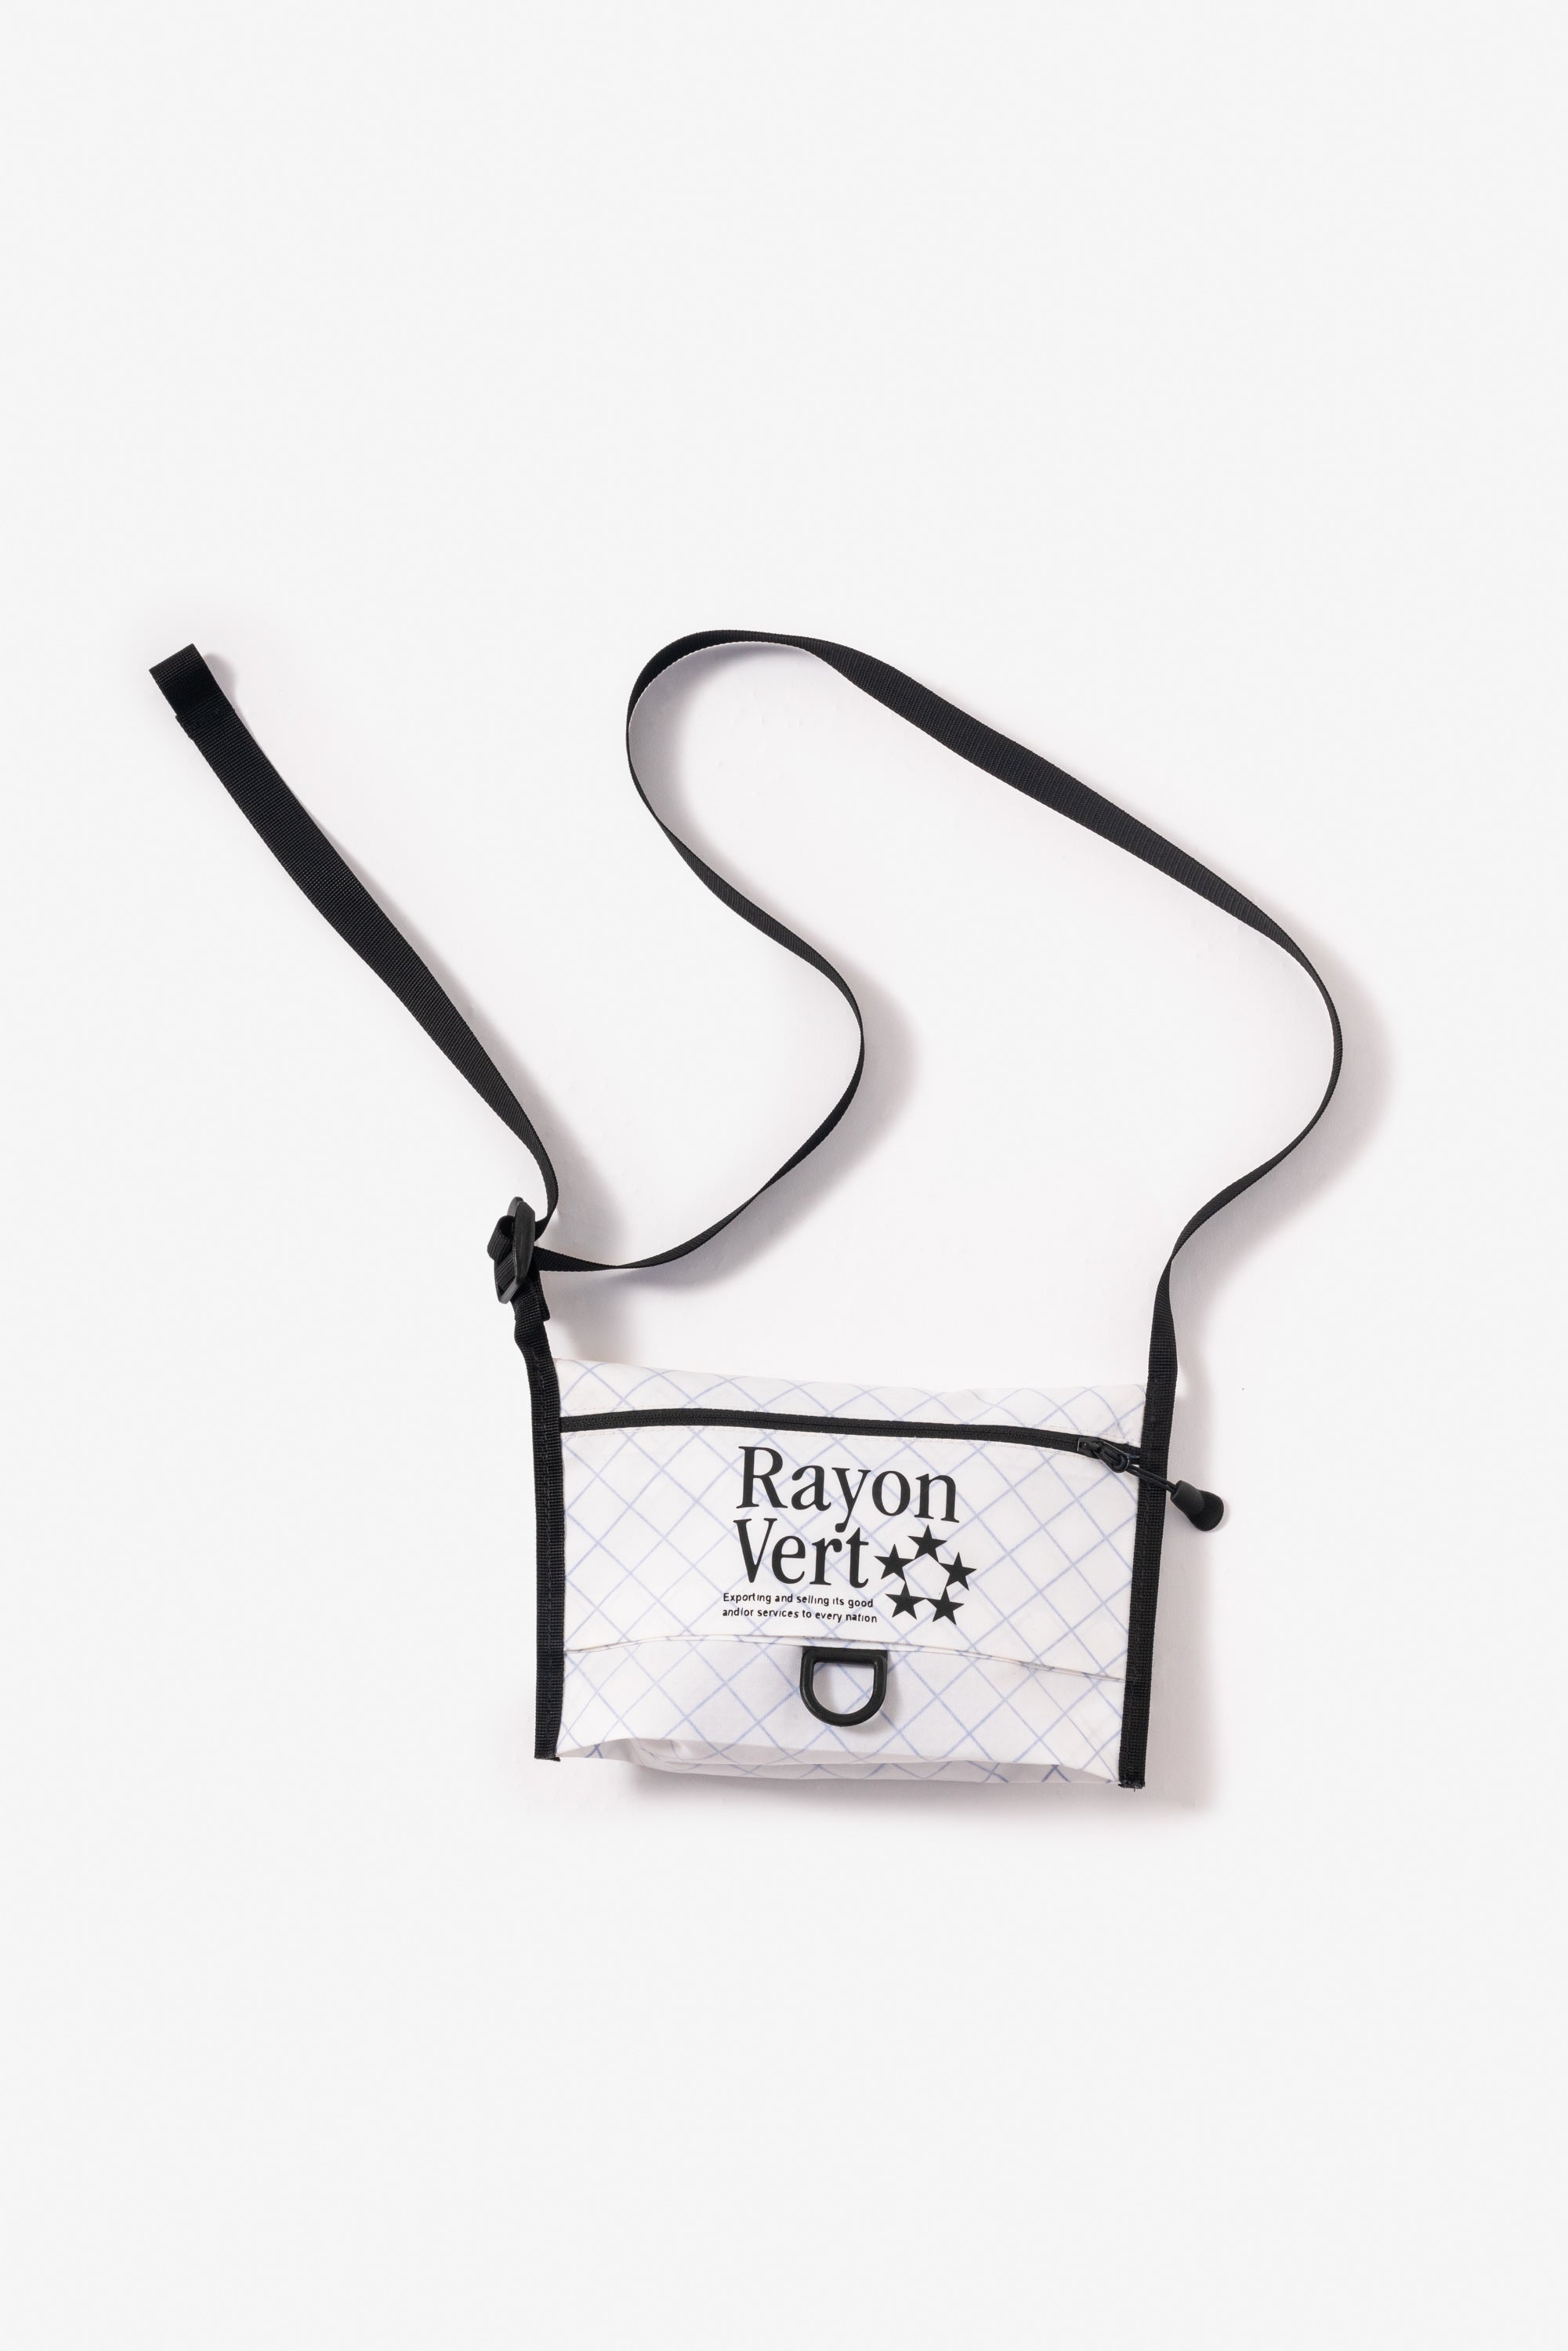 The RAYON VERT - ECOPAK? INTERNSHIP SACOCHE  available online with global shipping, and in PAM Stores Melbourne and Sydney.